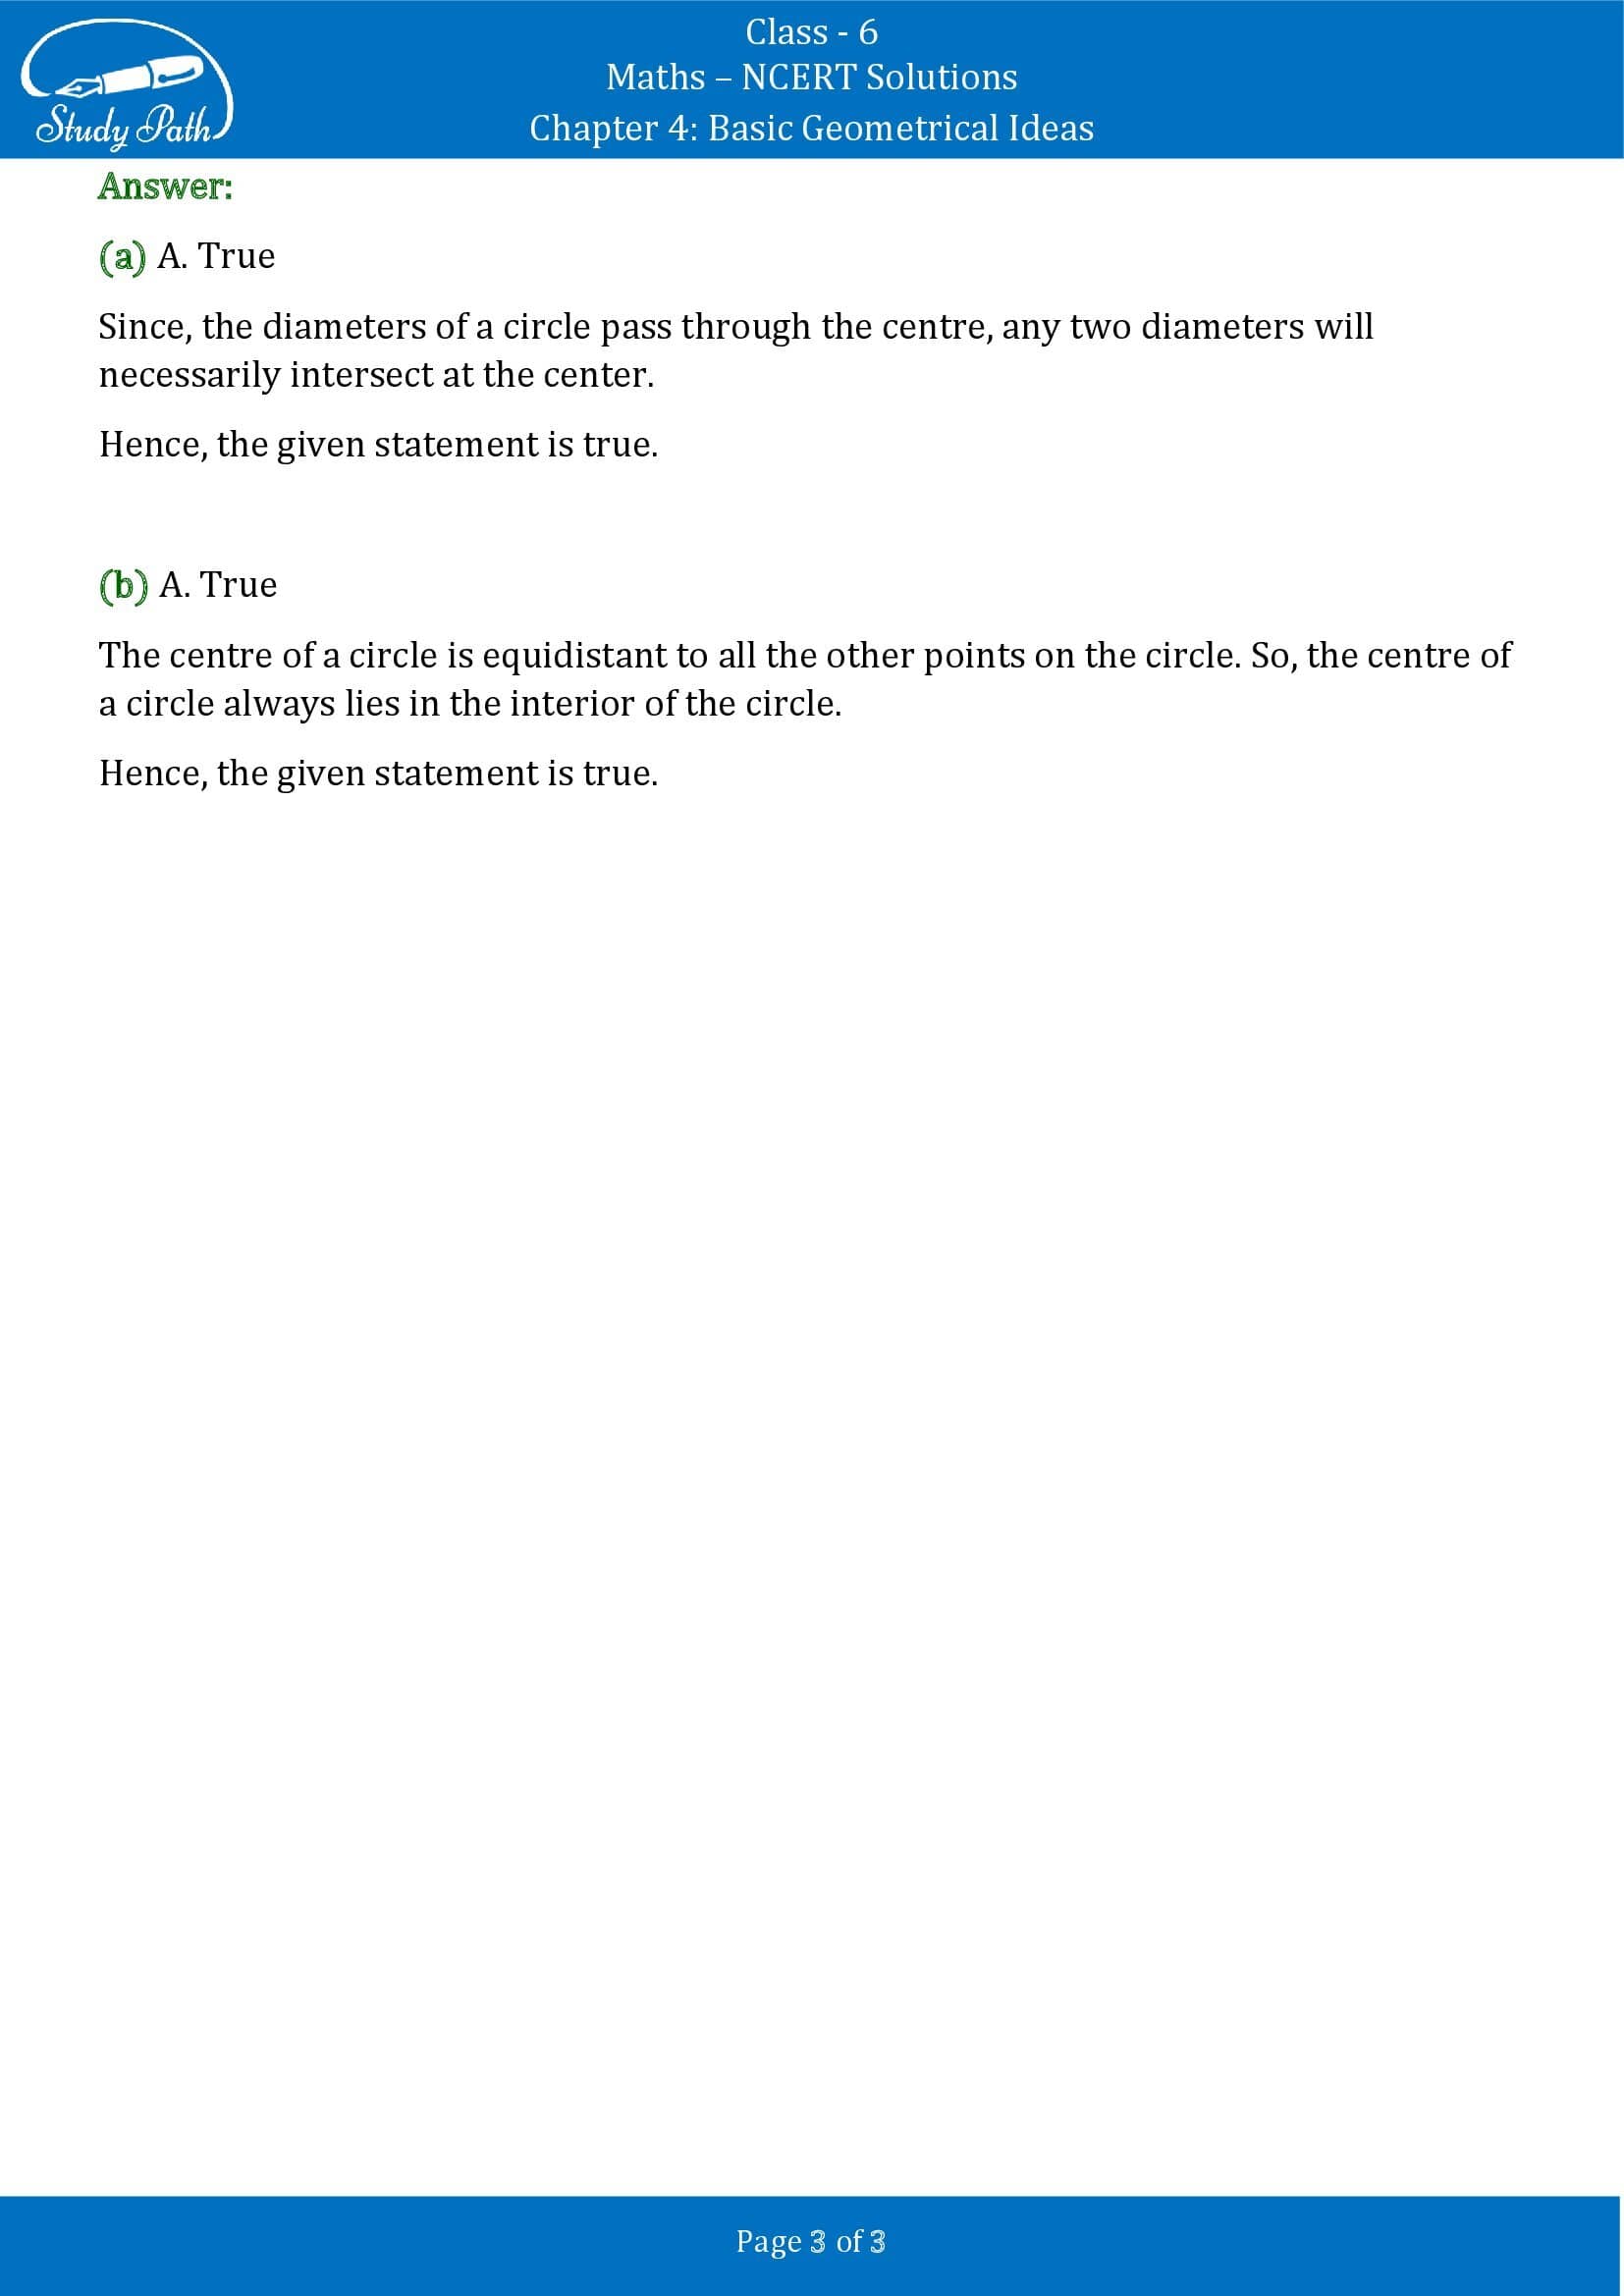 NCERT Solutions for Class 6 Maths Chapter 4 Basic Geometrical Ideas Exercise 4.6 00003